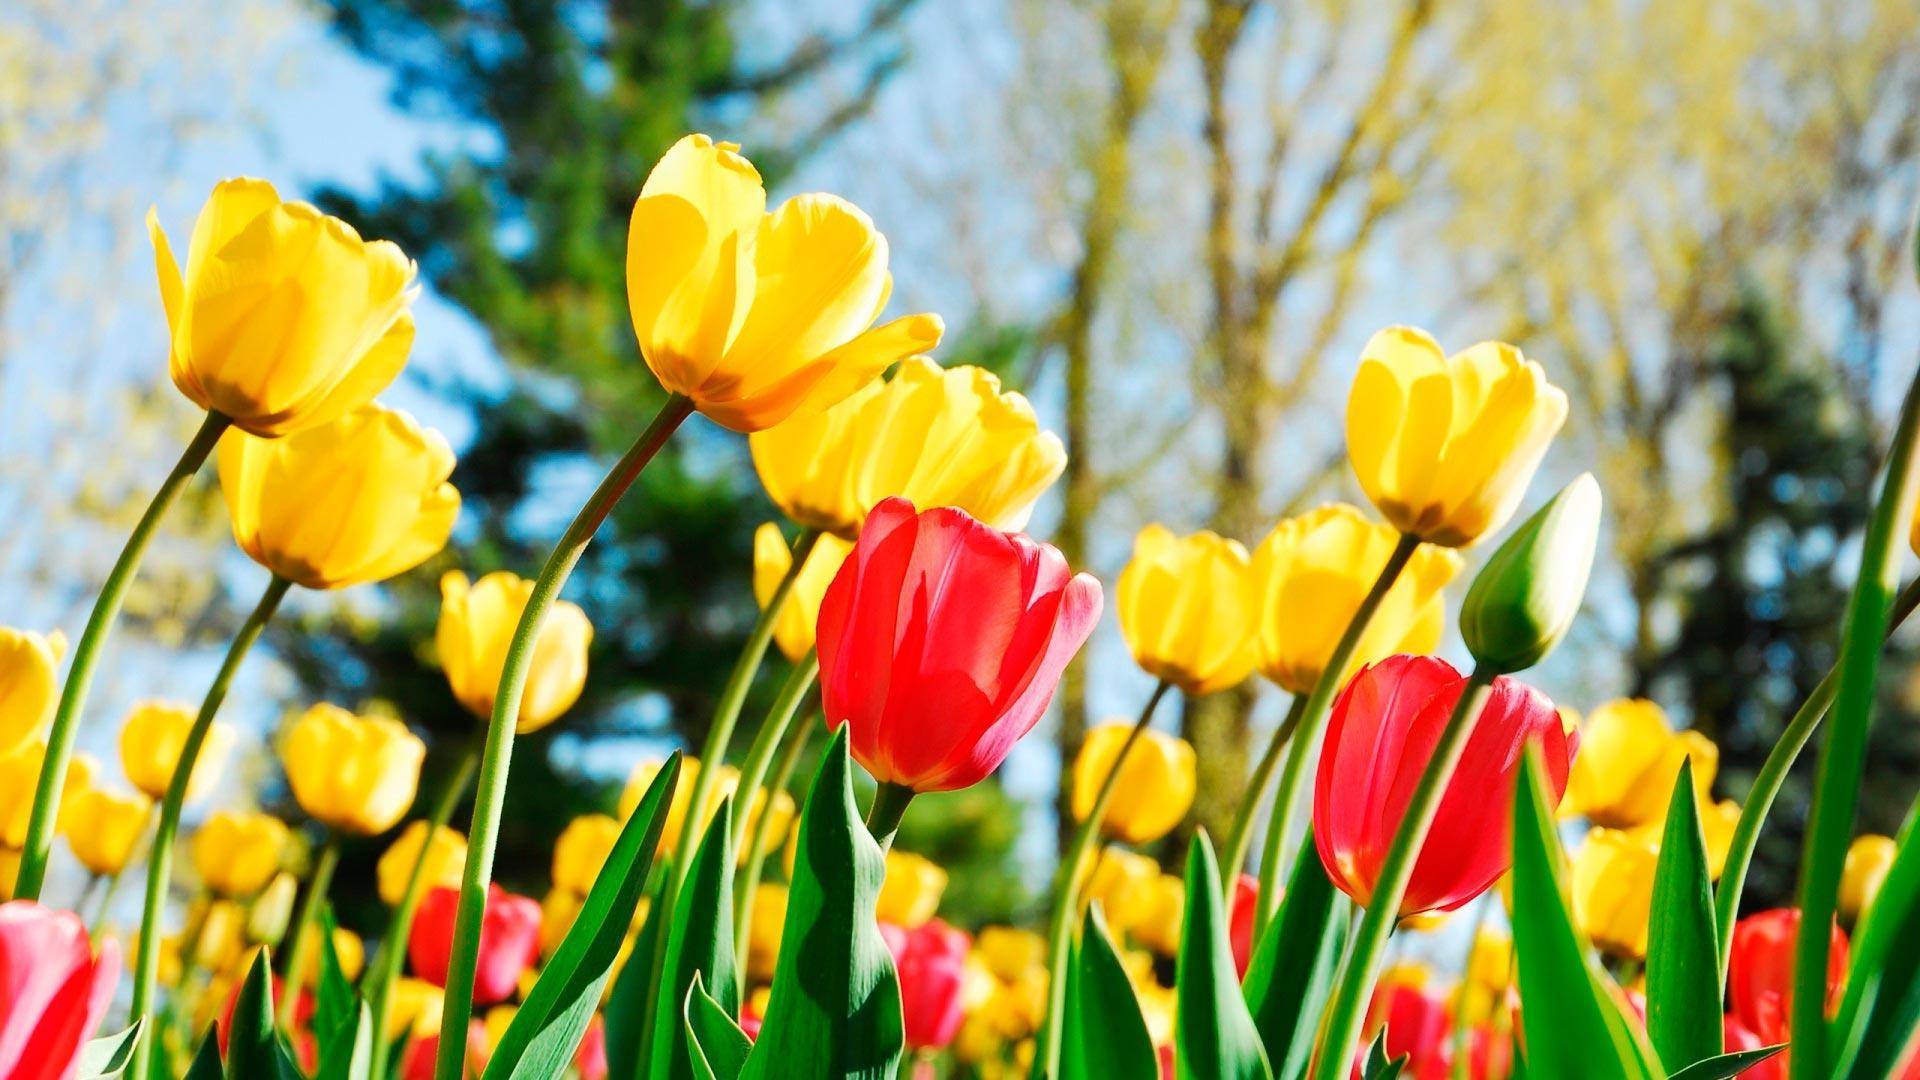 Live Wallpaper Spring Hd 4k Nature Pictures Flower For Android Apk